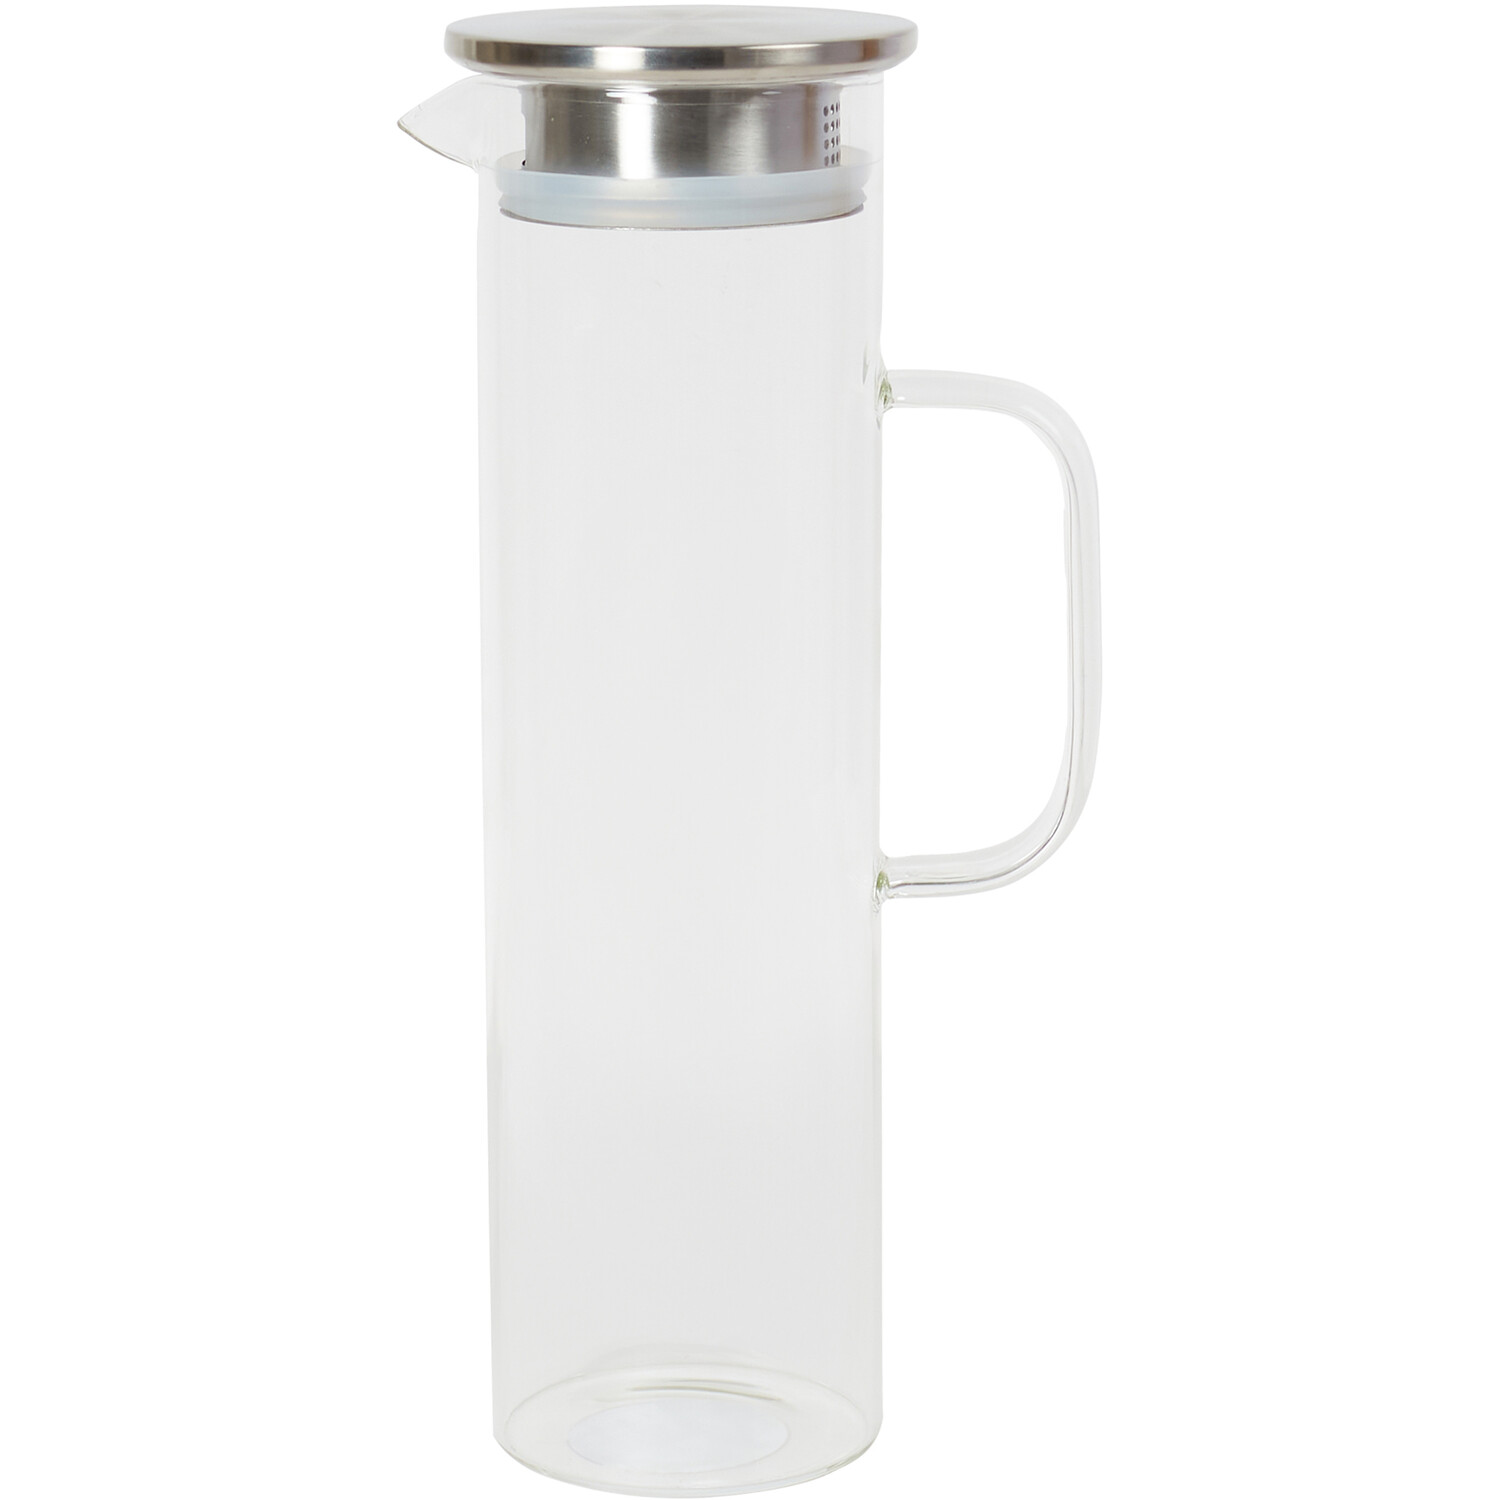 1.2L Glass Jug with Stainless Steel Lid - Clear Image 1